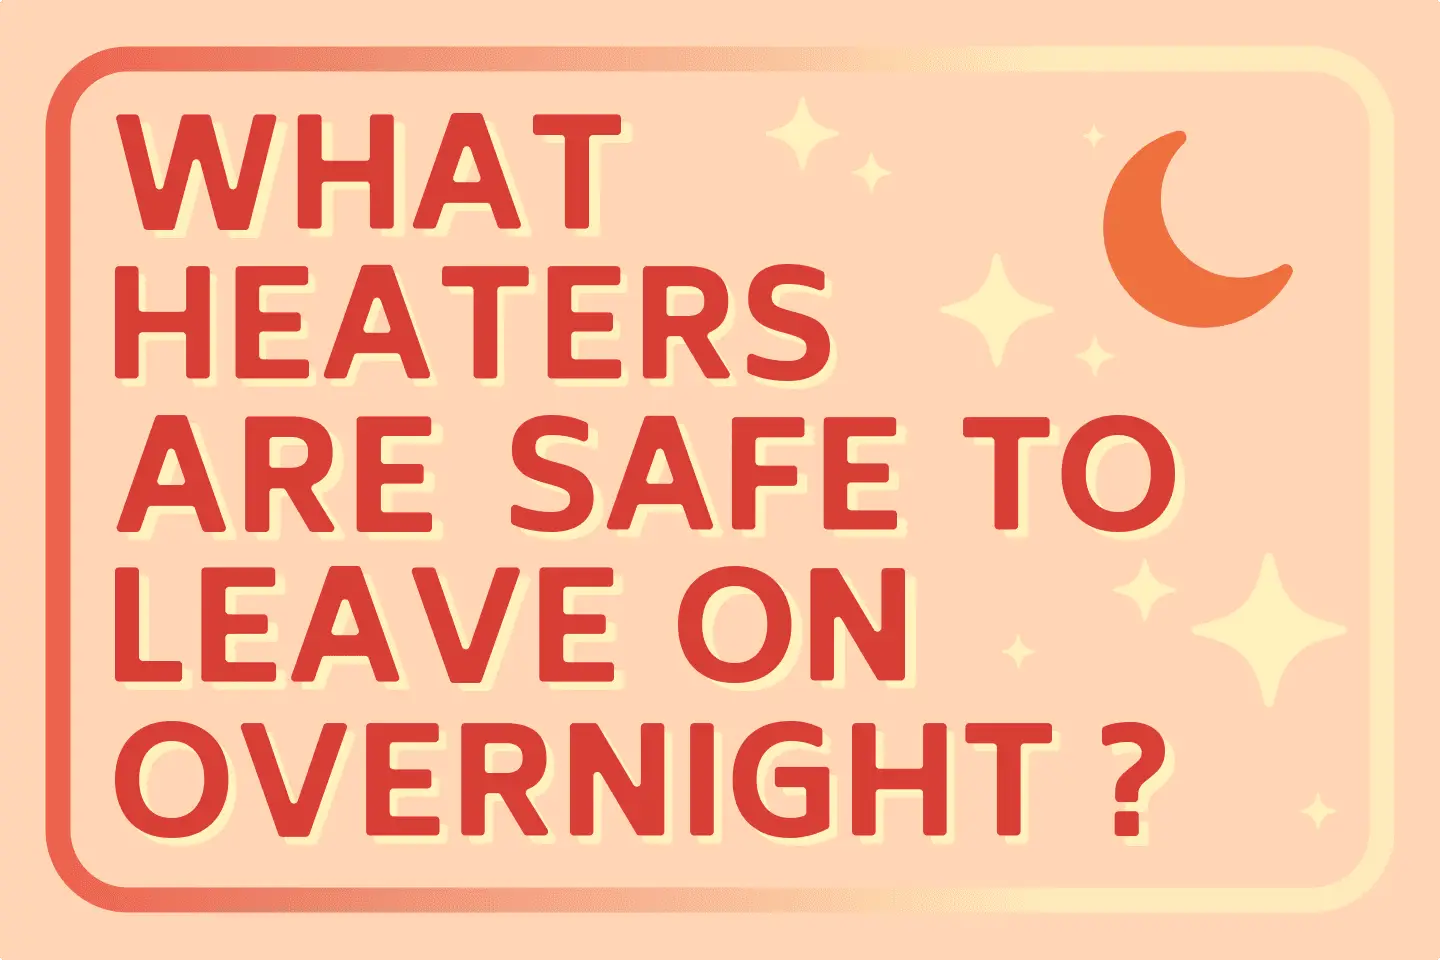 Which Heaters Are Safe to Leave On Overnight?